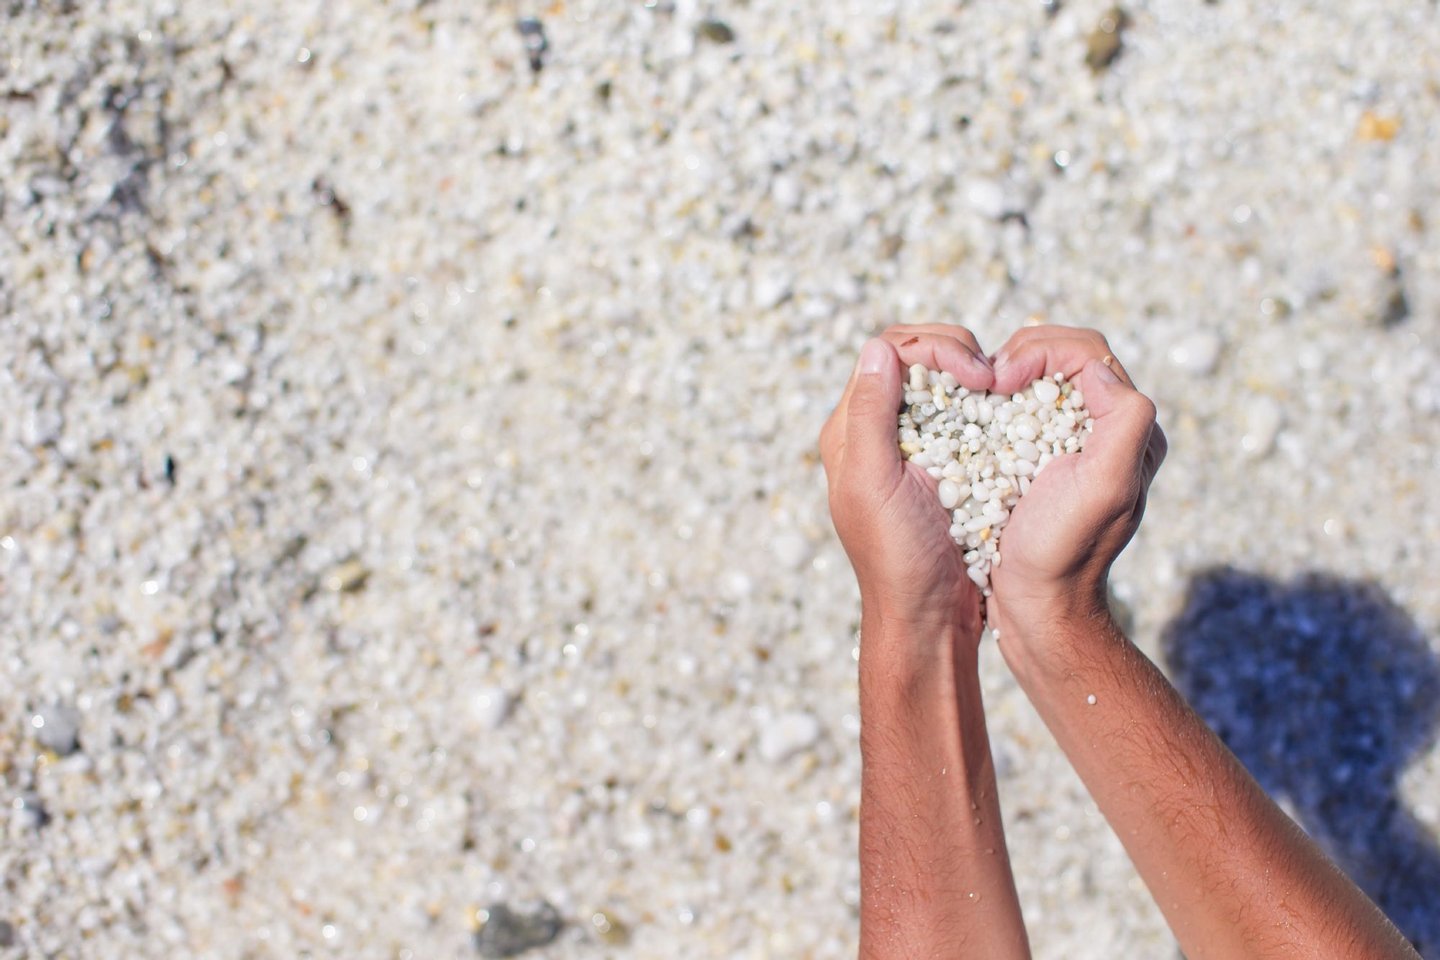 beach, heart, white, love, symbol, body part, pebbles, gravel, coastline, exotic, expression, expressive, feeling, horizontal, finger, hand, macro, outdoor, romantic, sand, summer, tropical, turquoise, vacation, valentine, heart shape, hands, sign, holiday, picture, card, human, destination, kiss, celebration, handmade, 14, lover, touching, decorative, body, woman, color, colorful, joy, valentines, getaway, part, romance, february, 